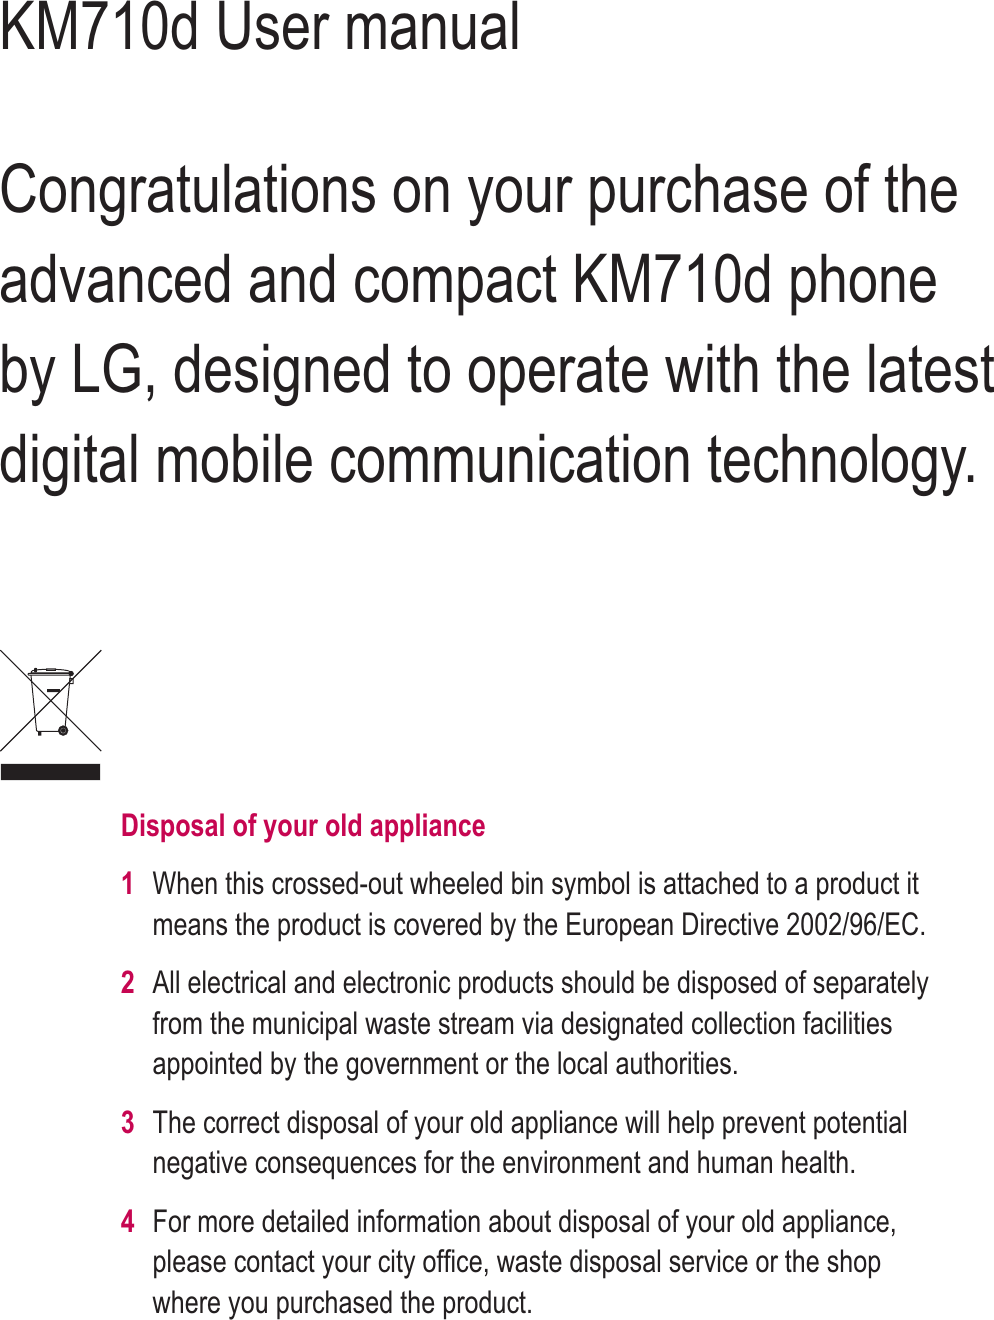 KM710d User manualCongratulations on your purchase of the advanced and compact KM710d phone by LG, designed to operate with the latest digital mobile communication technology.Disposal of your old appliance 1When this crossed-out wheeled bin symbol is attached to a product it means the product is covered by the European Directive 2002/96/EC.2All electrical and electronic products should be disposed of separately from the municipal waste stream via designated collection facilities appointed by the government or the local authorities.3The correct disposal of your old appliance will help prevent potential negative consequences for the environment and human health.4 For more detailed information about disposal of your old appliance, please contact your city ofﬁ ce, waste disposal service or the shop where you purchased the product.